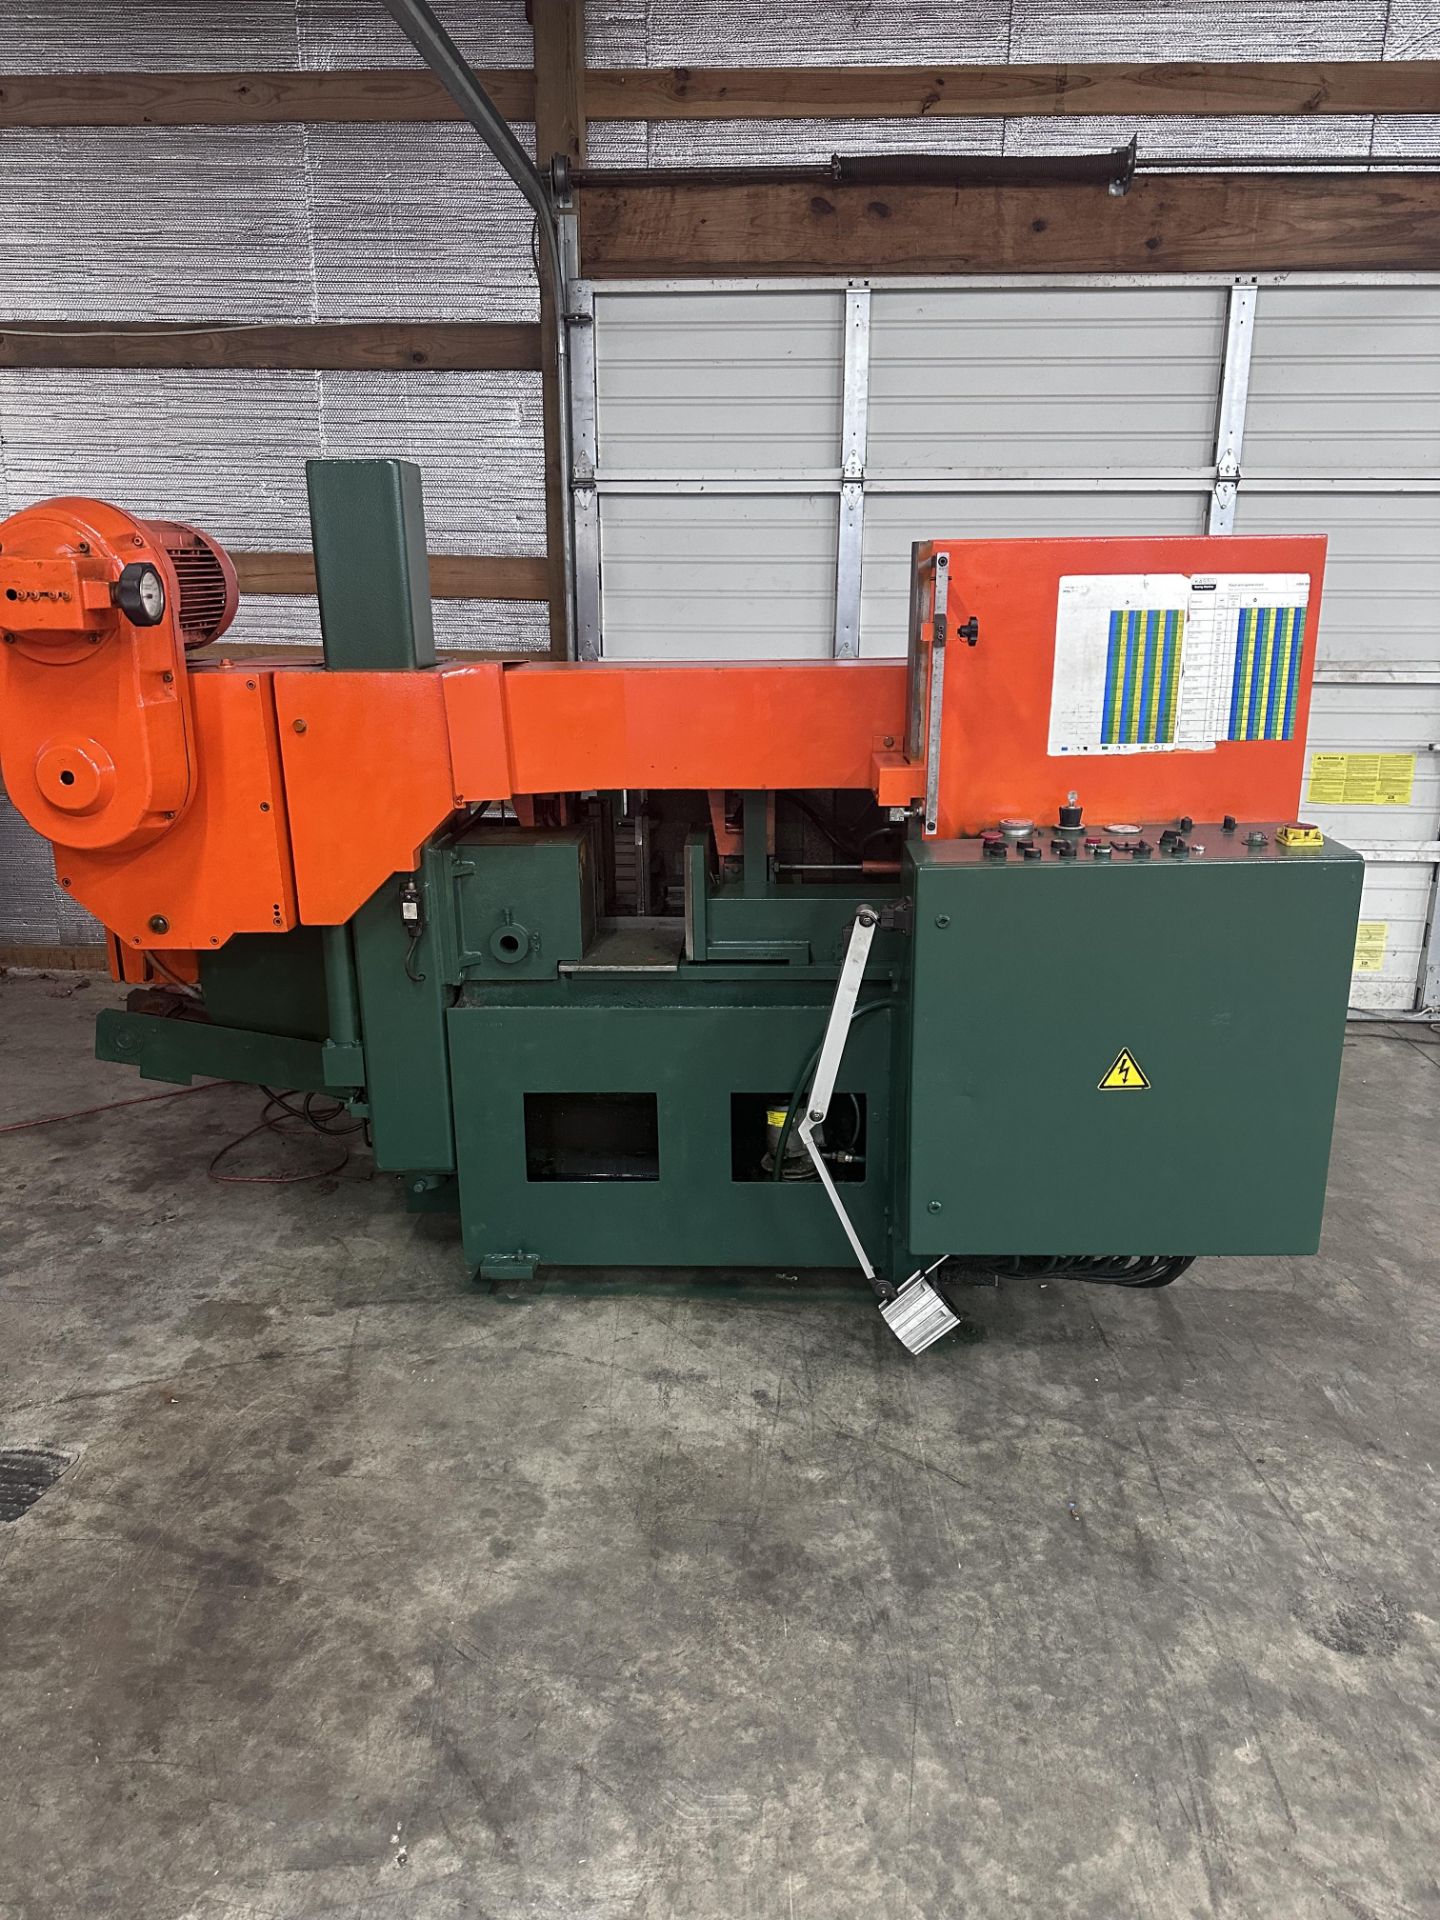 KASTO MODEL 360 AU 14"X14" AUTOMATIC HORIZONTAL BANDSAW, (2) SAWS SOLD AS 1 LOT - Image 8 of 10